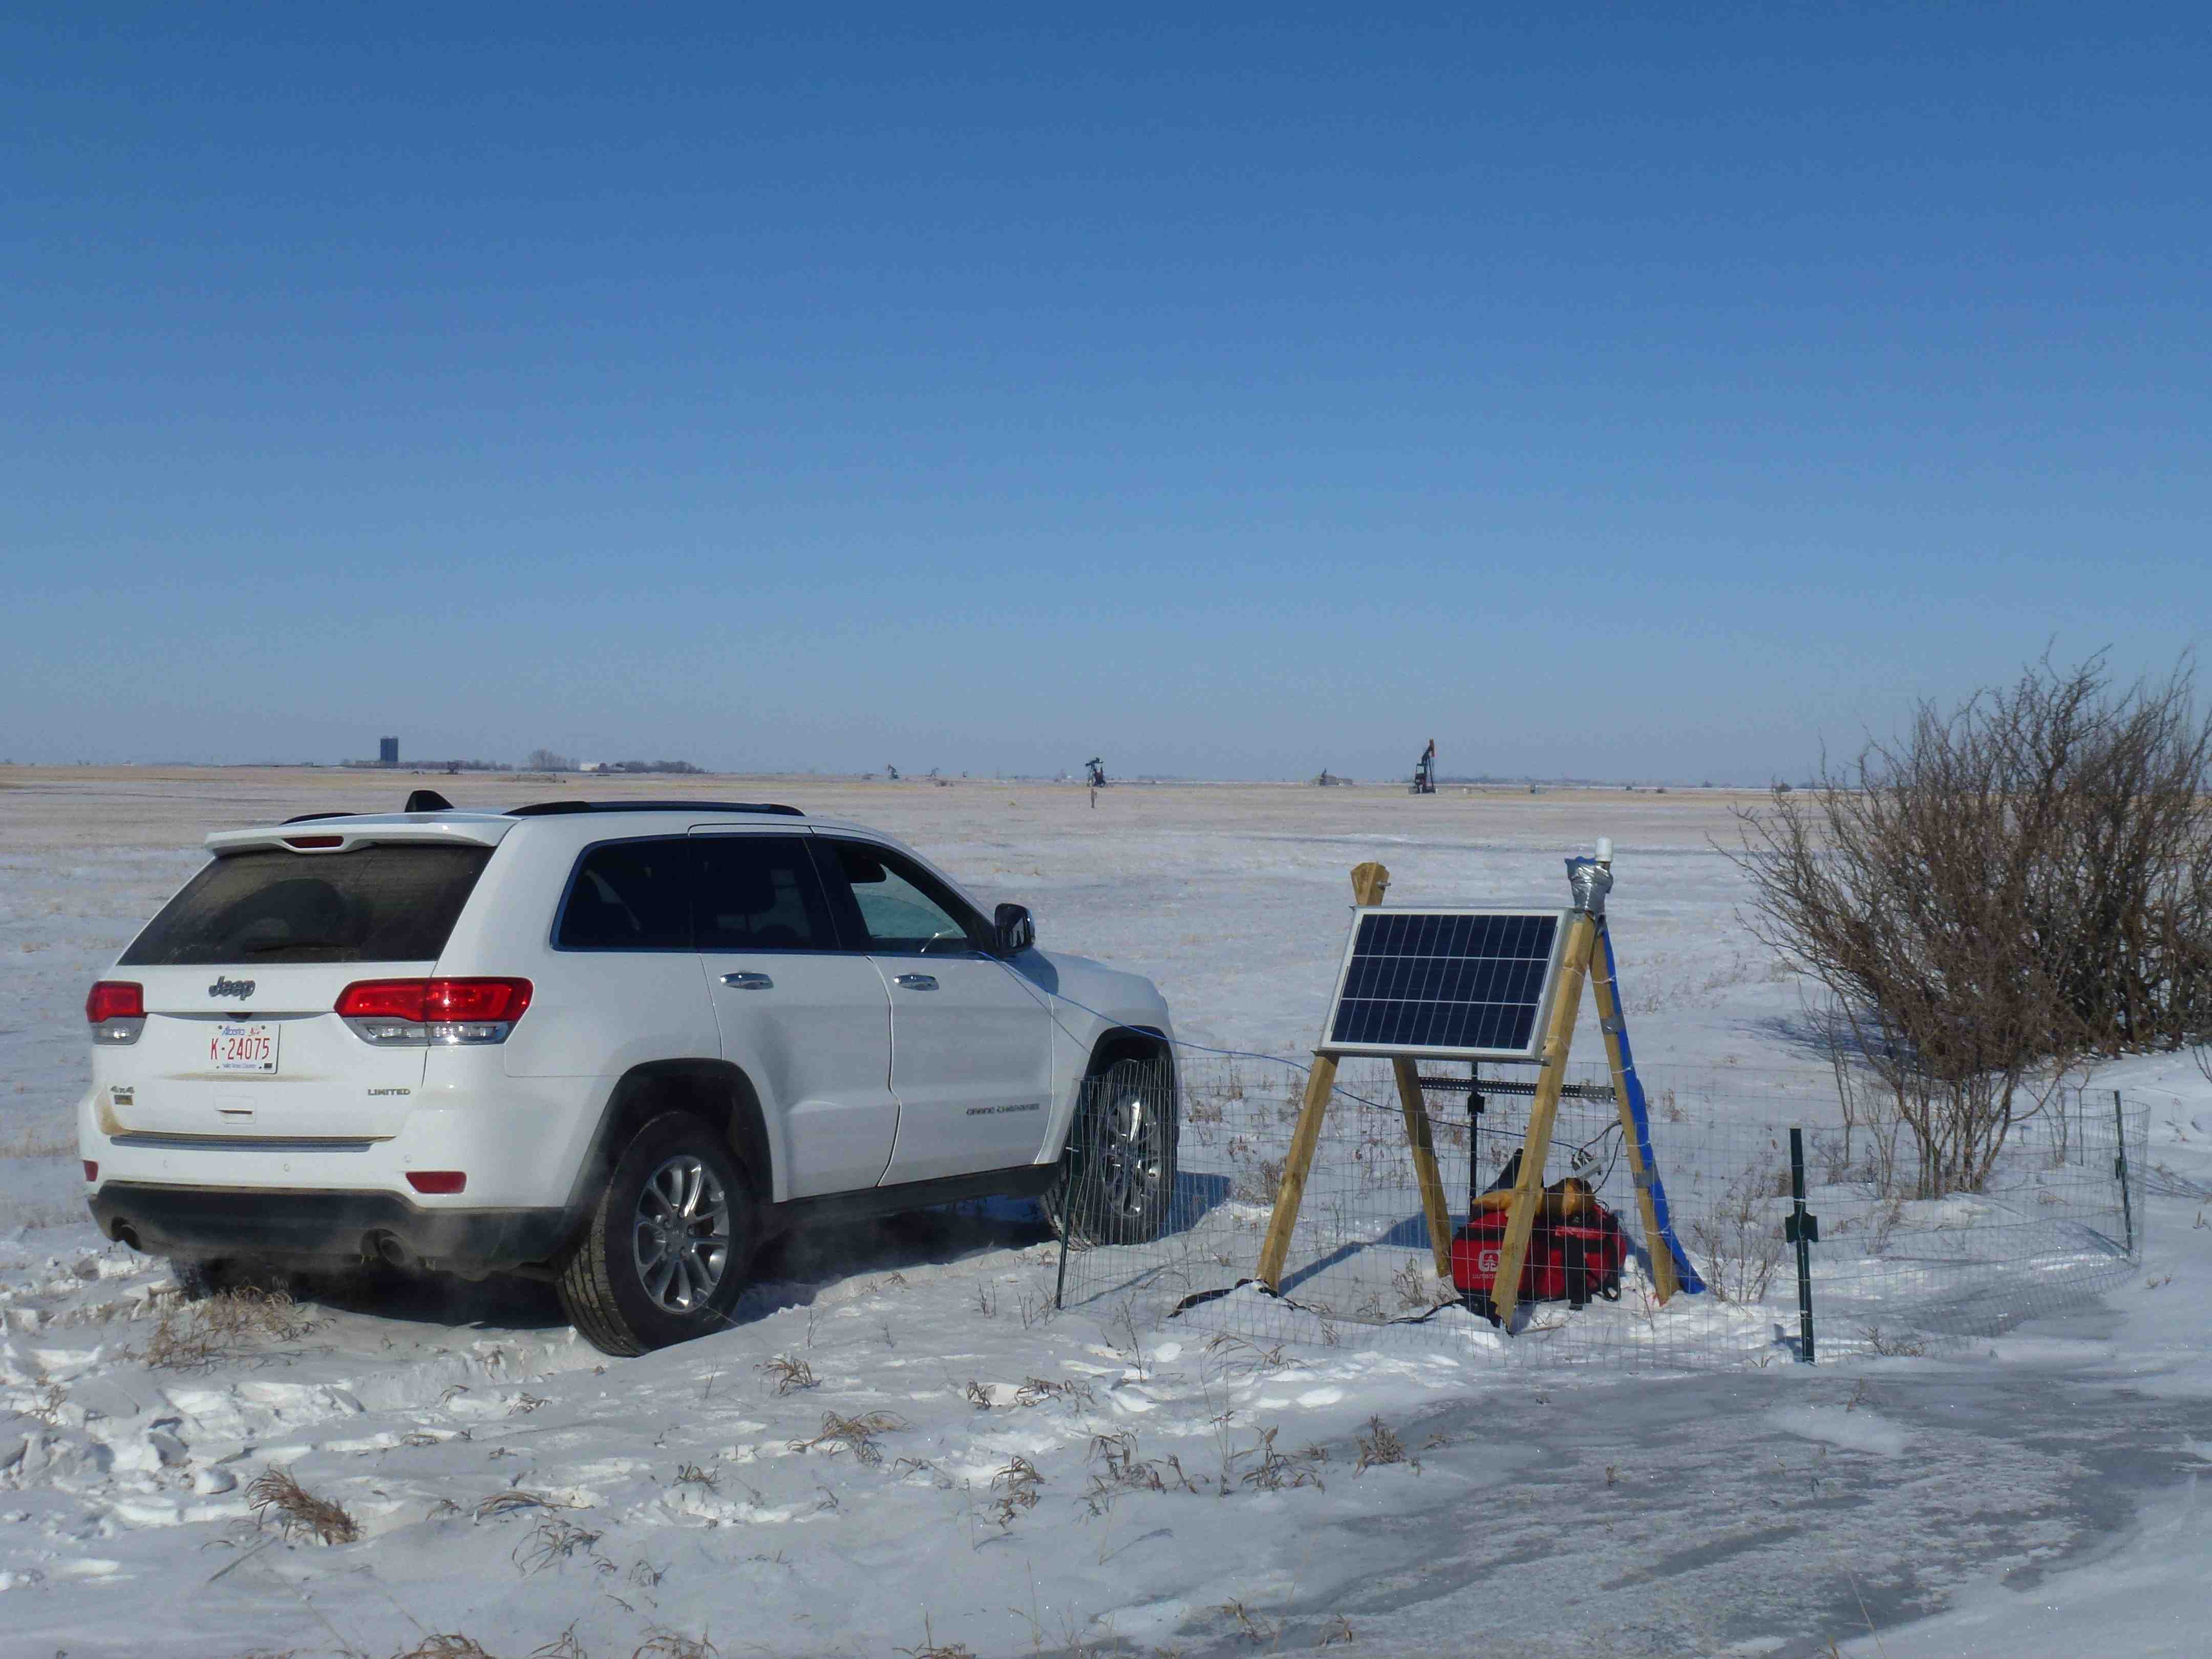 Servicing one of our Weyburn sites in the depths of the Canadian winter, with temperatures as low as -20<sup>o</sup>C 